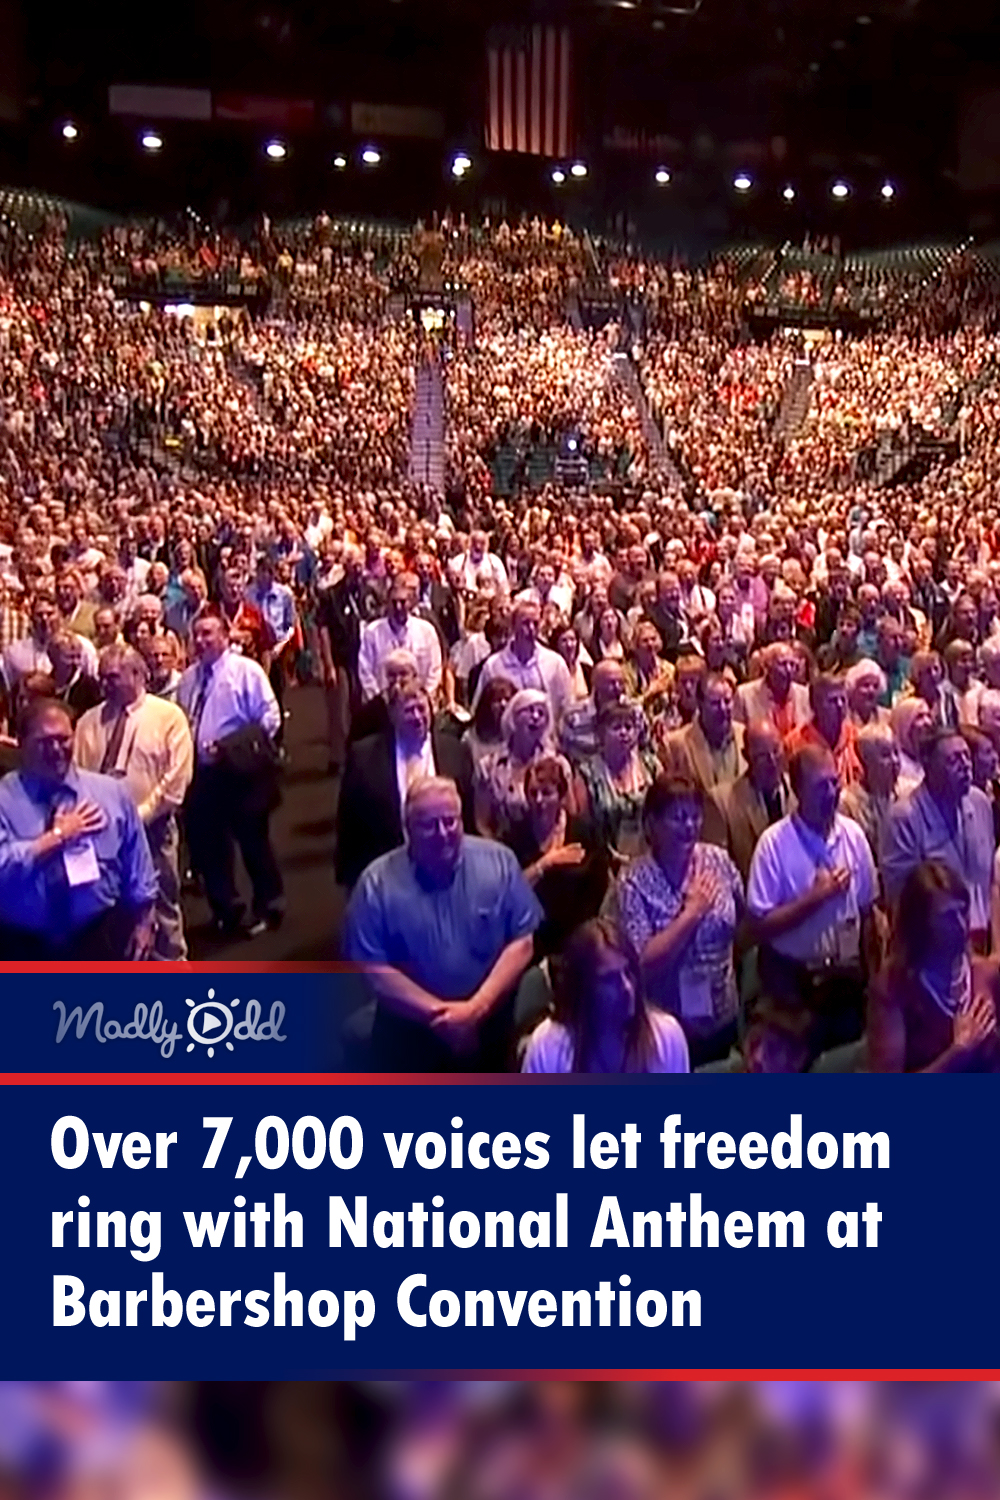 Over 7,000 voices let freedom ring with National Anthem at Barbershop Convention